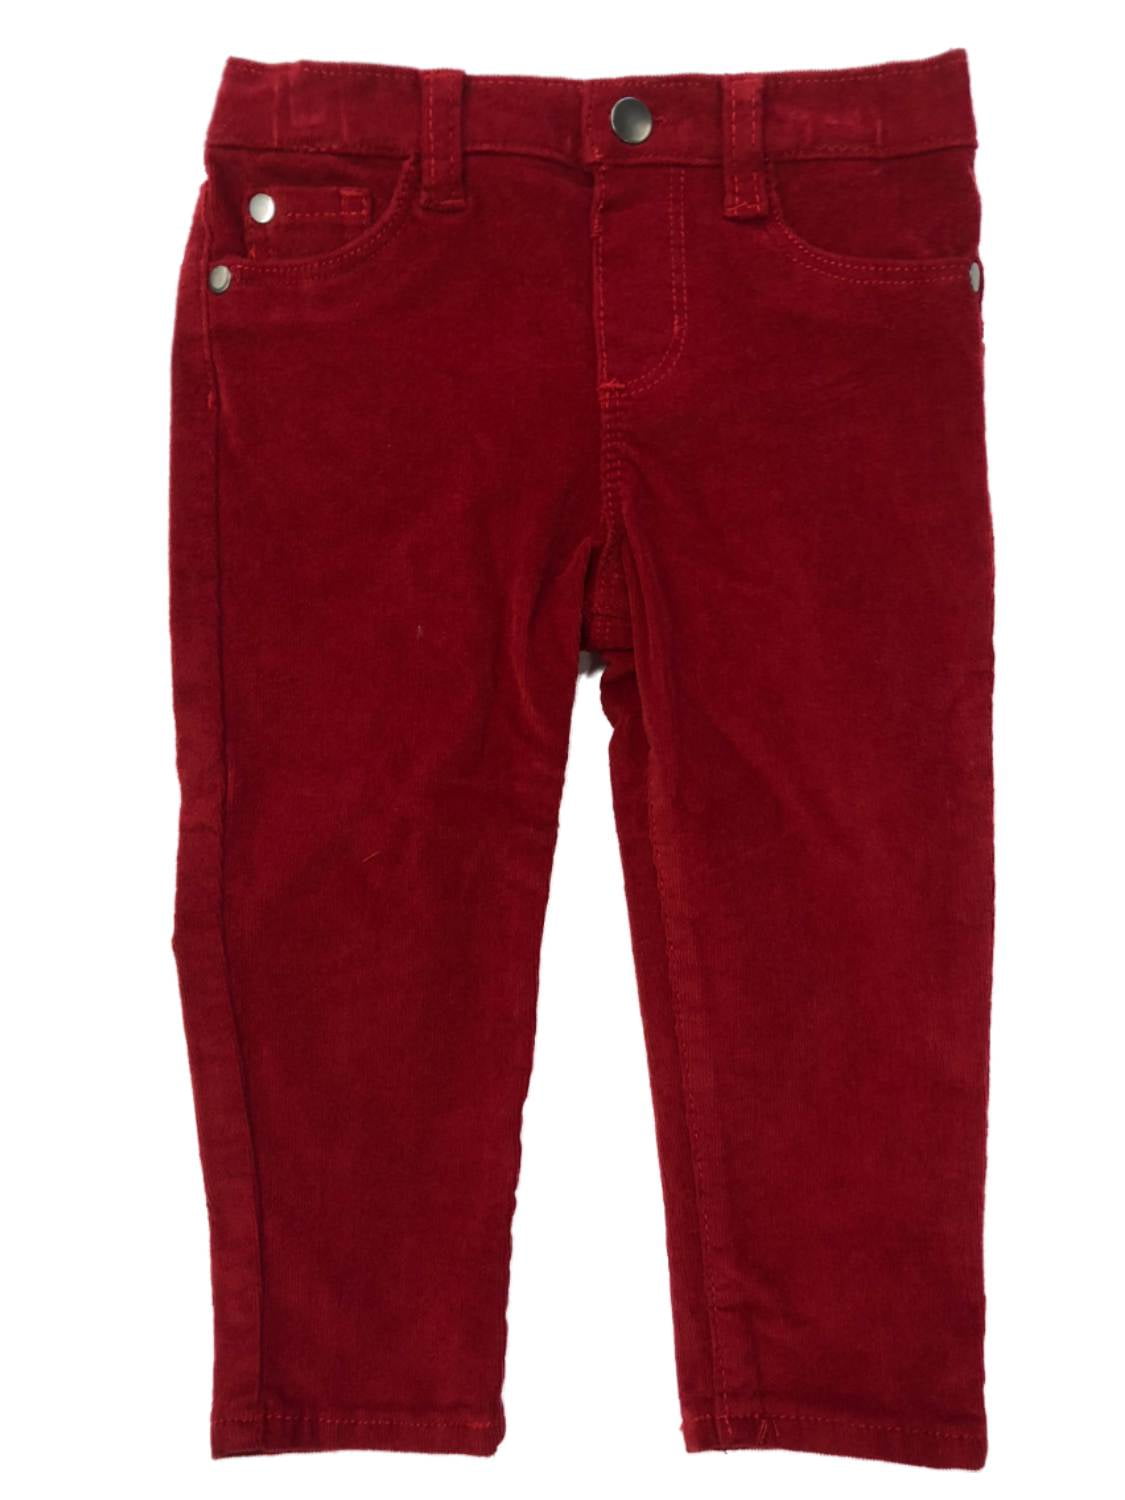 Infant & Toddler Girls & Boys Red Corduroy Jeans Pants Cranberry Baby ...